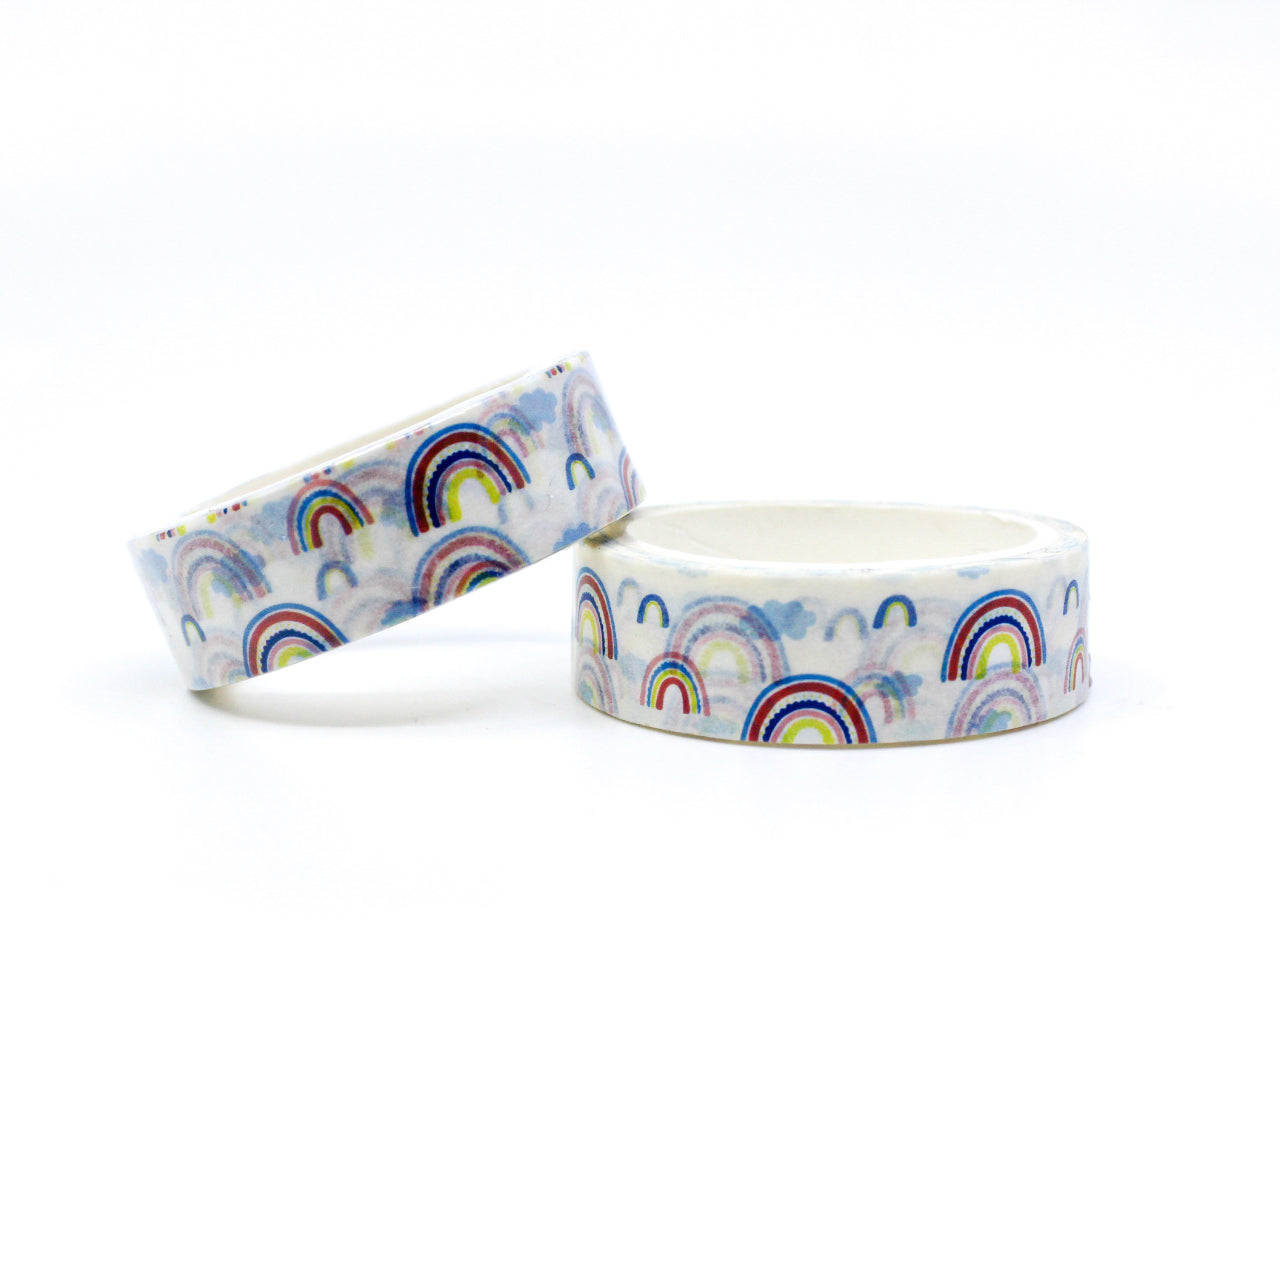 Add a dose of cuteness to your crafts with our Cute Rainbows & Cloud Washi Tape, featuring delightful rainbow and cloud motifs. Perfect for adding a whimsical and cheerful touch to your projects. This tape is sold at BBB Supplies Craft Shop.